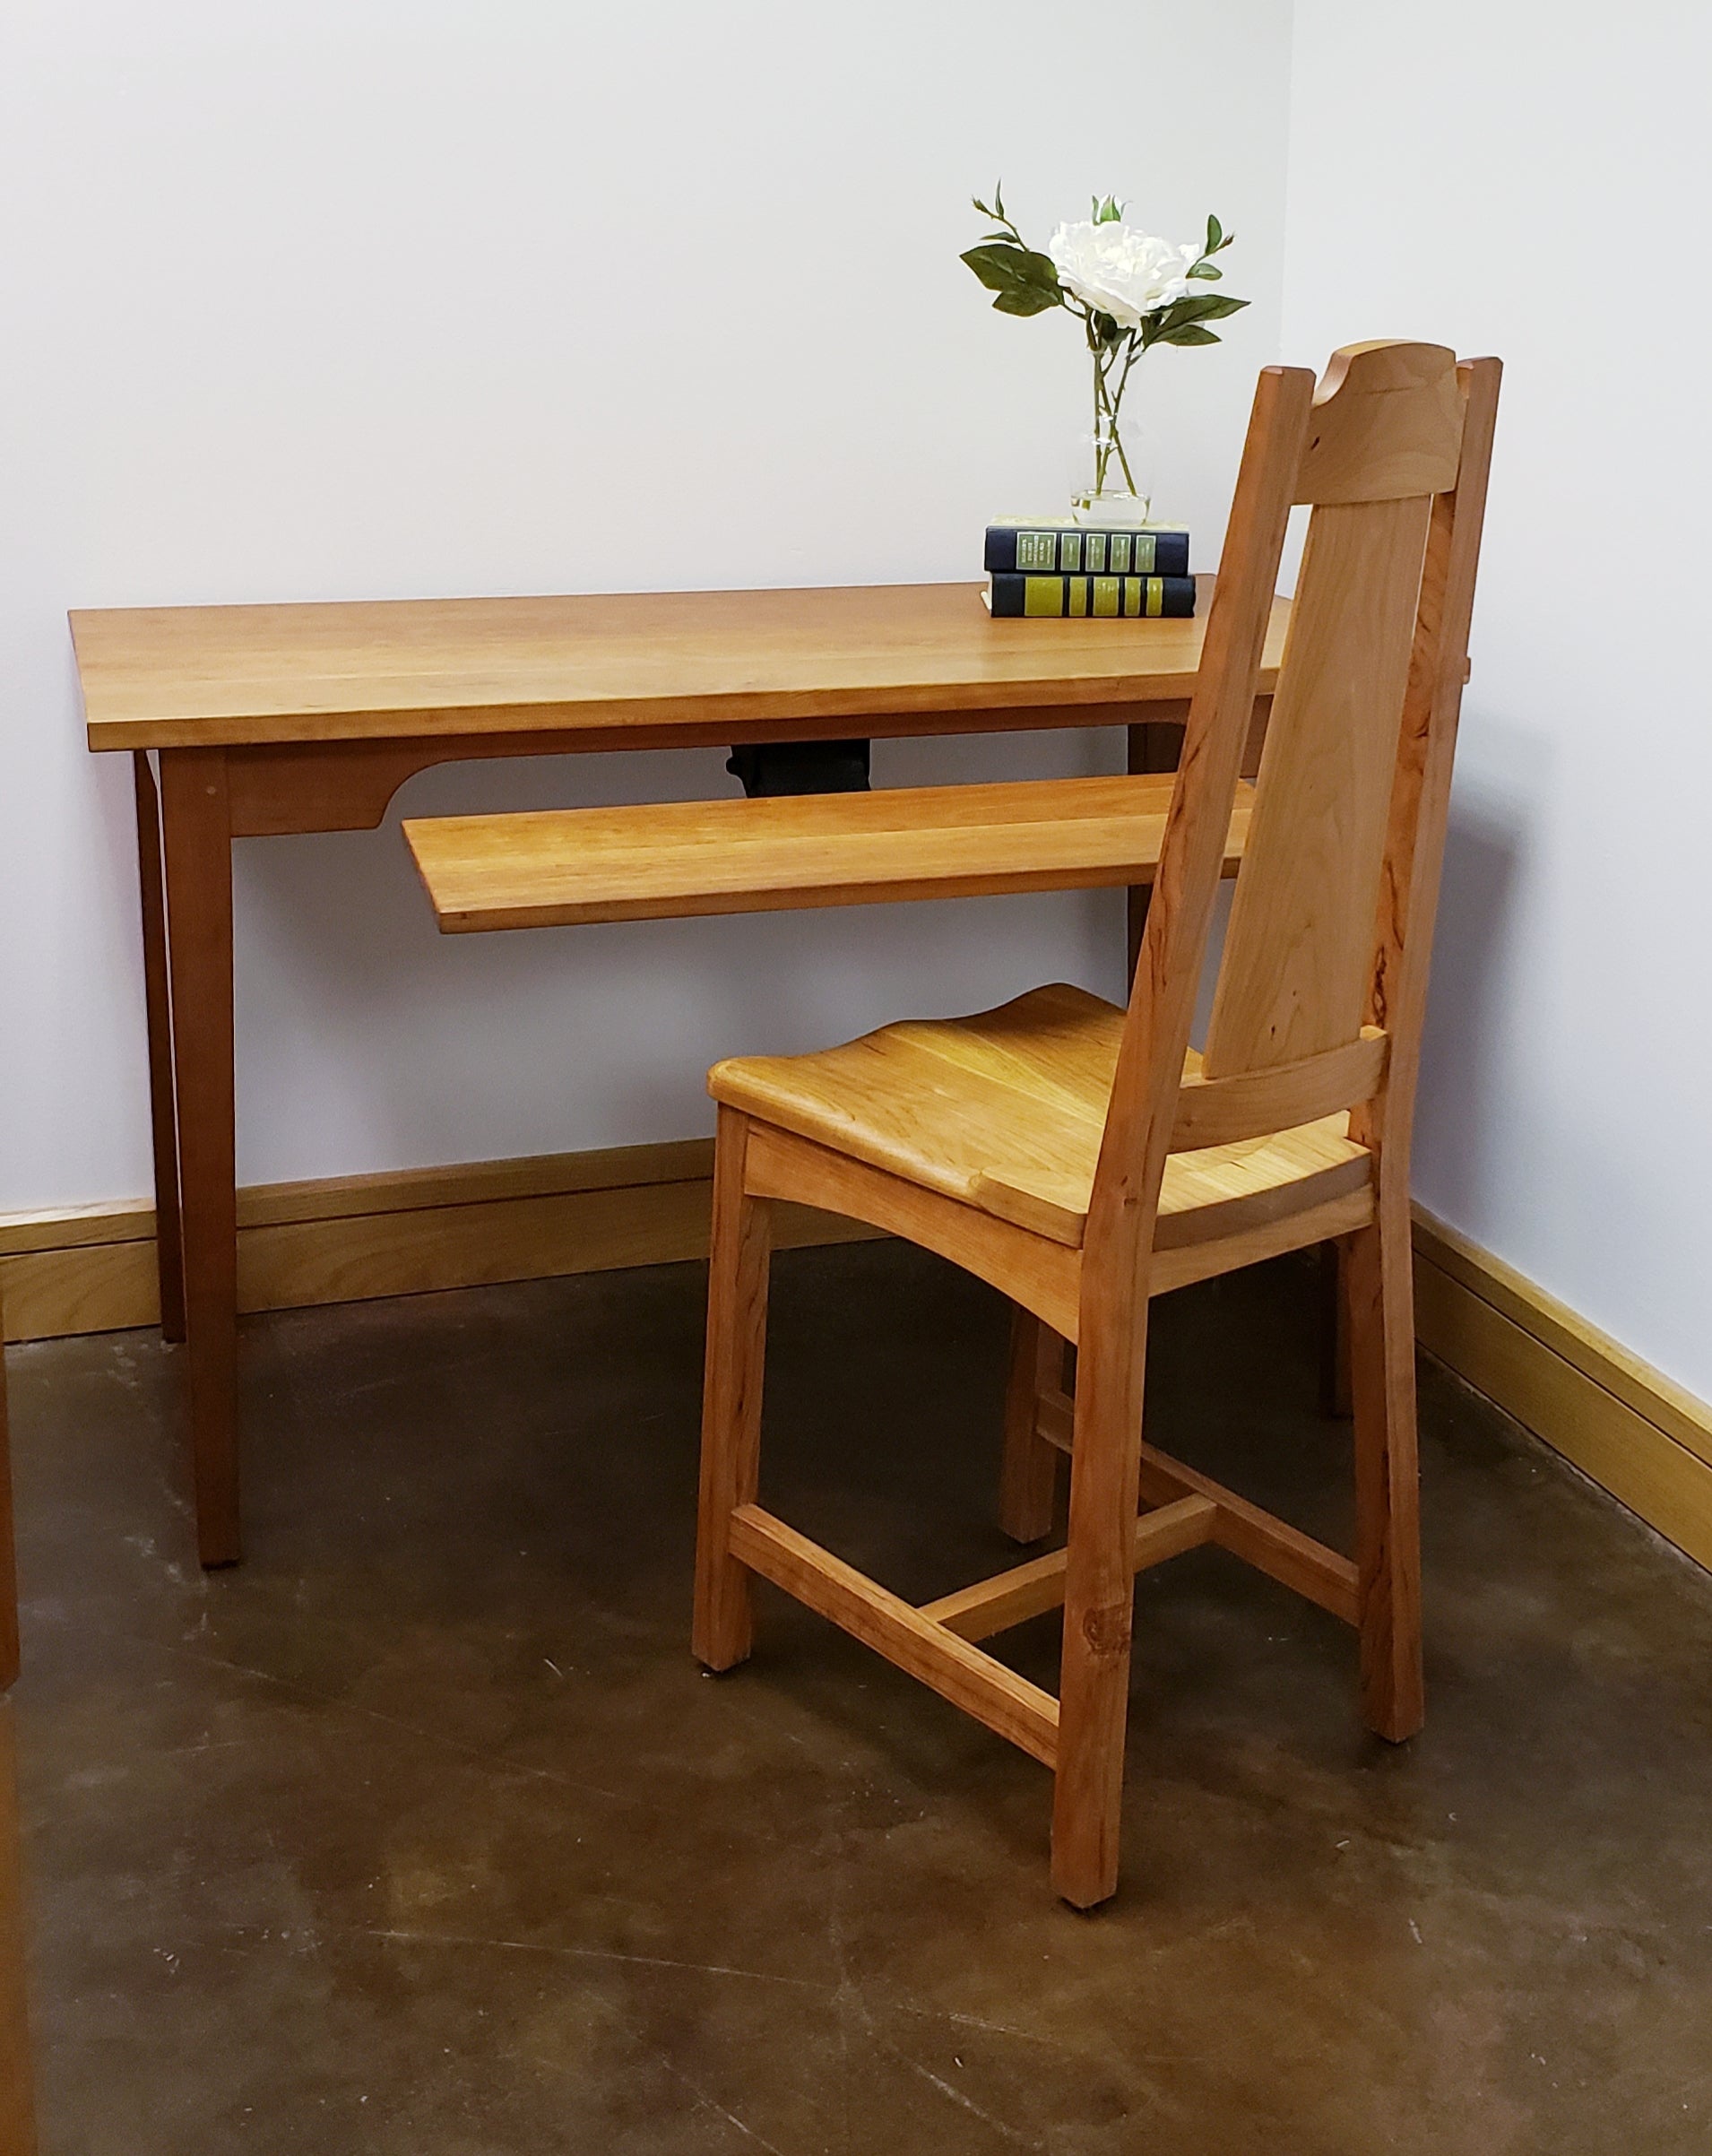 Small Table Desk Hardwood Artisans Handcrafted Office Furniture